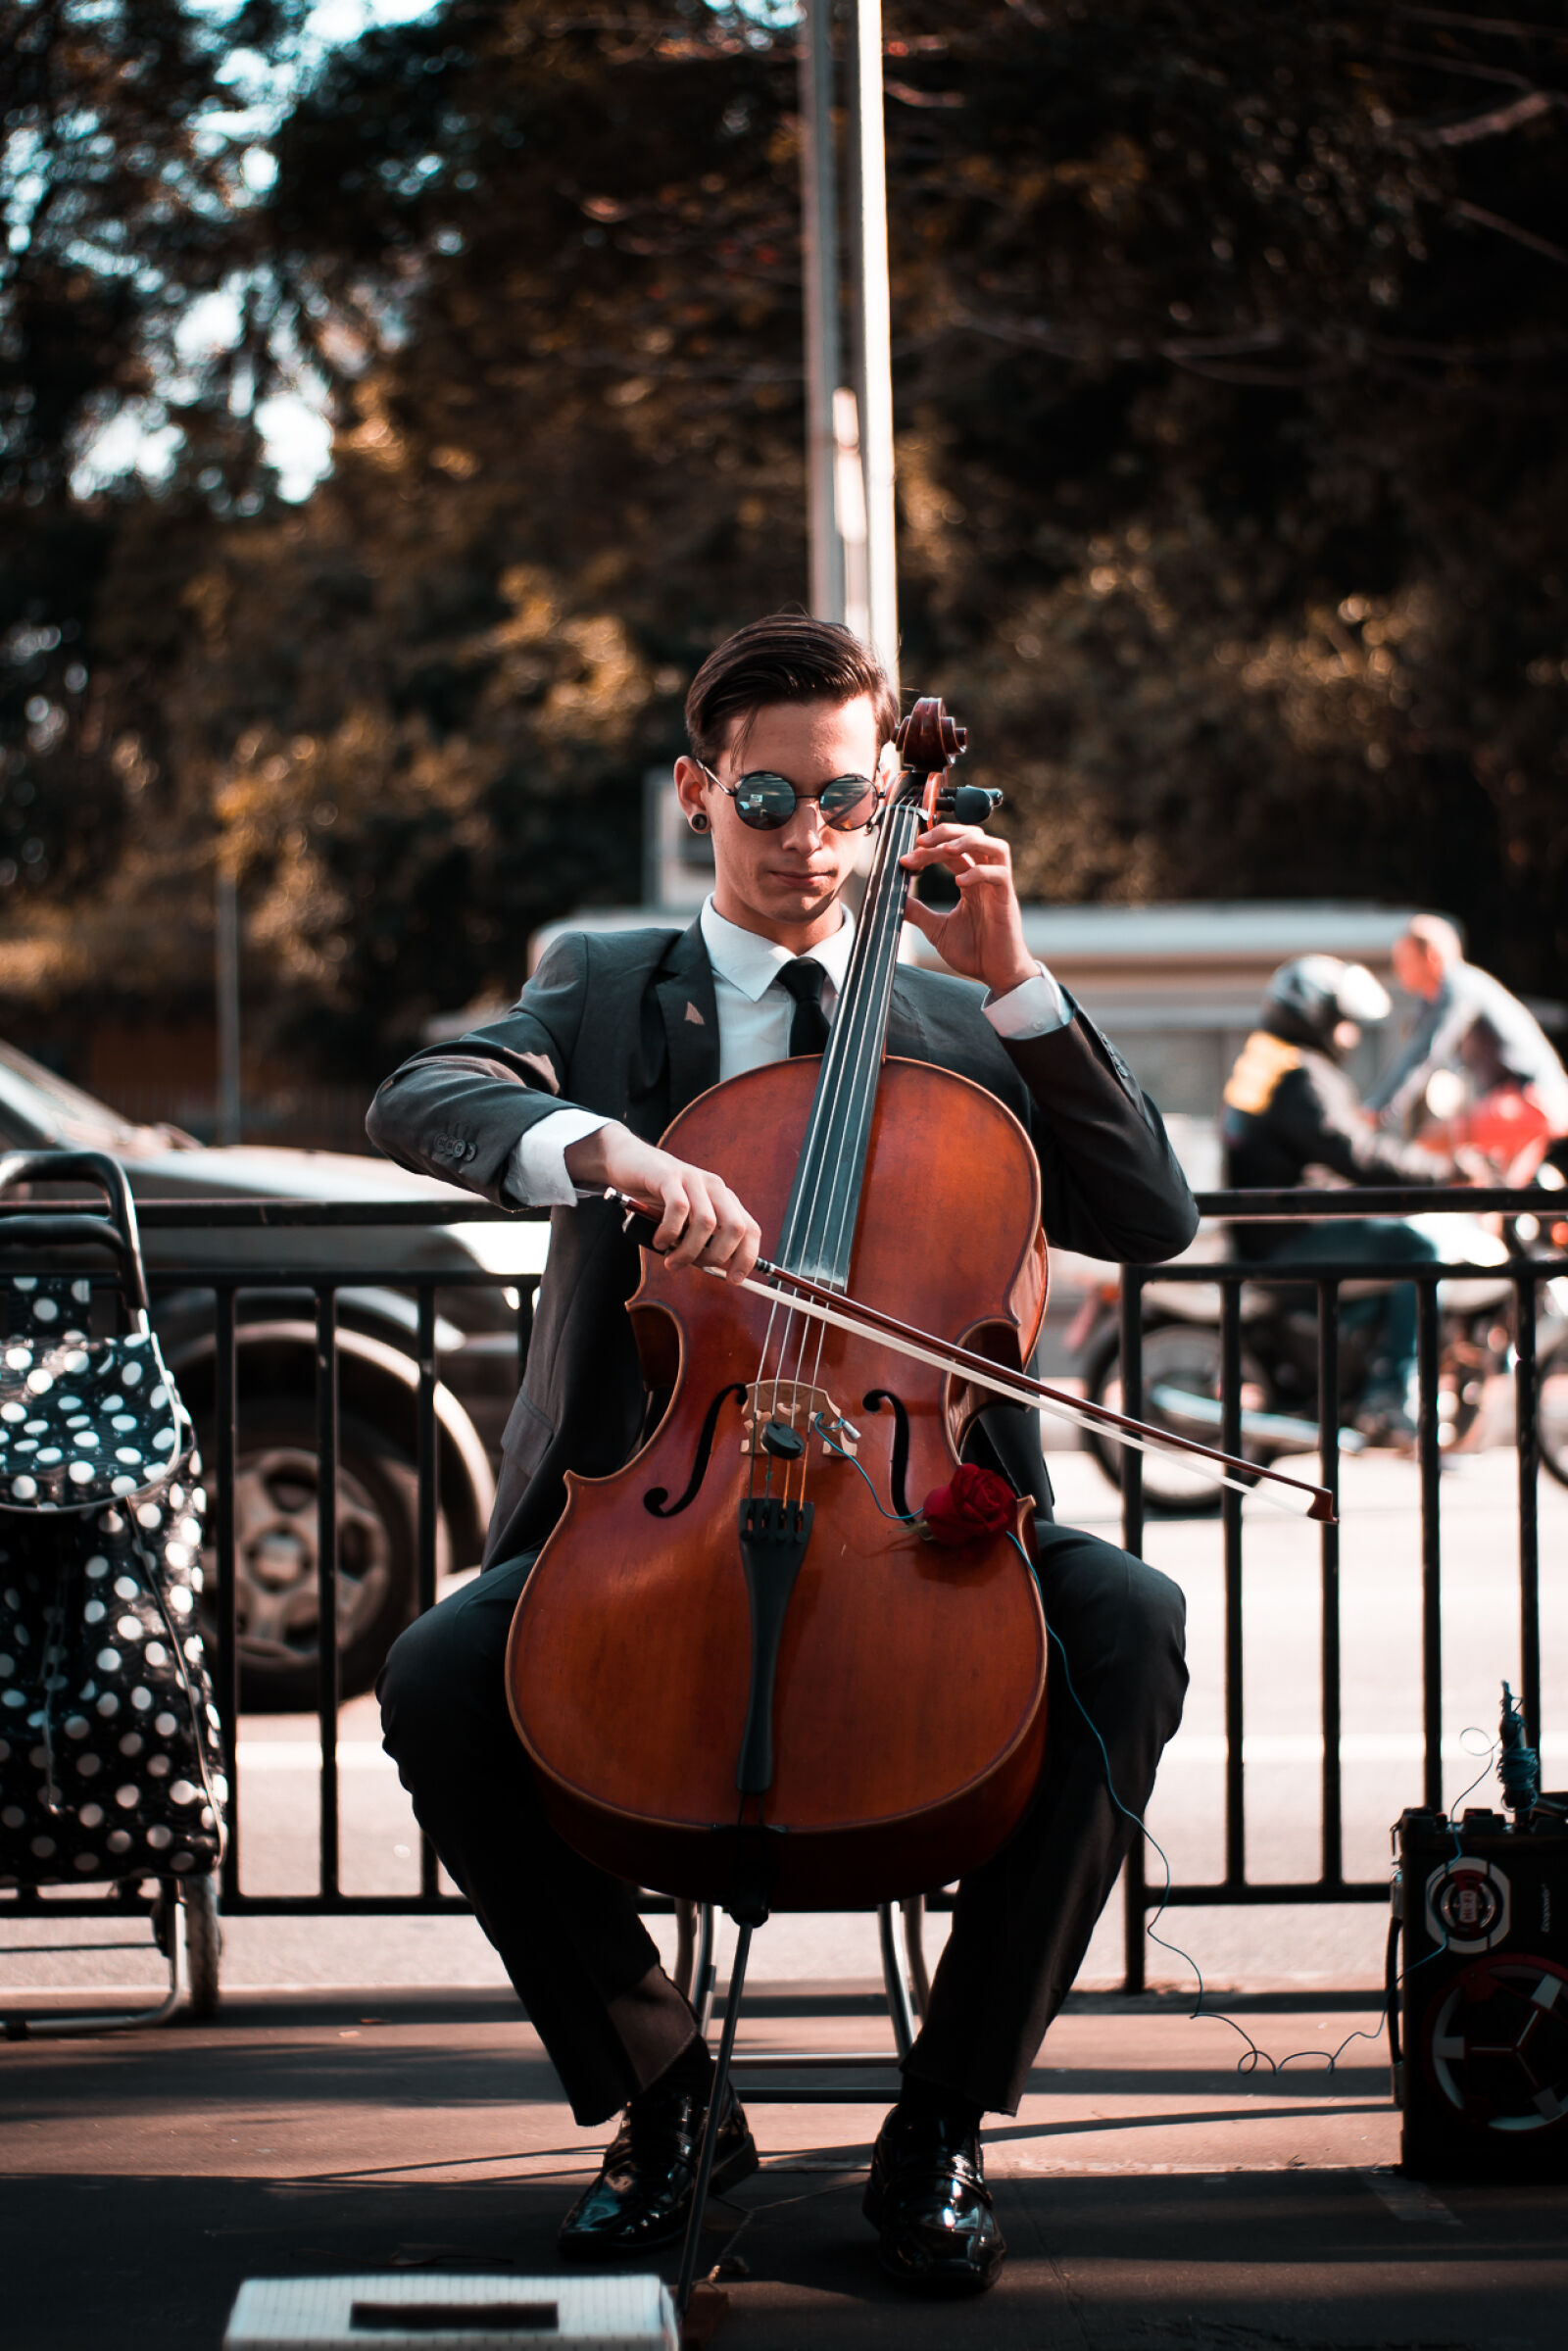 Sony a6300 sample photo. Bowed, string, instrument, boy photography